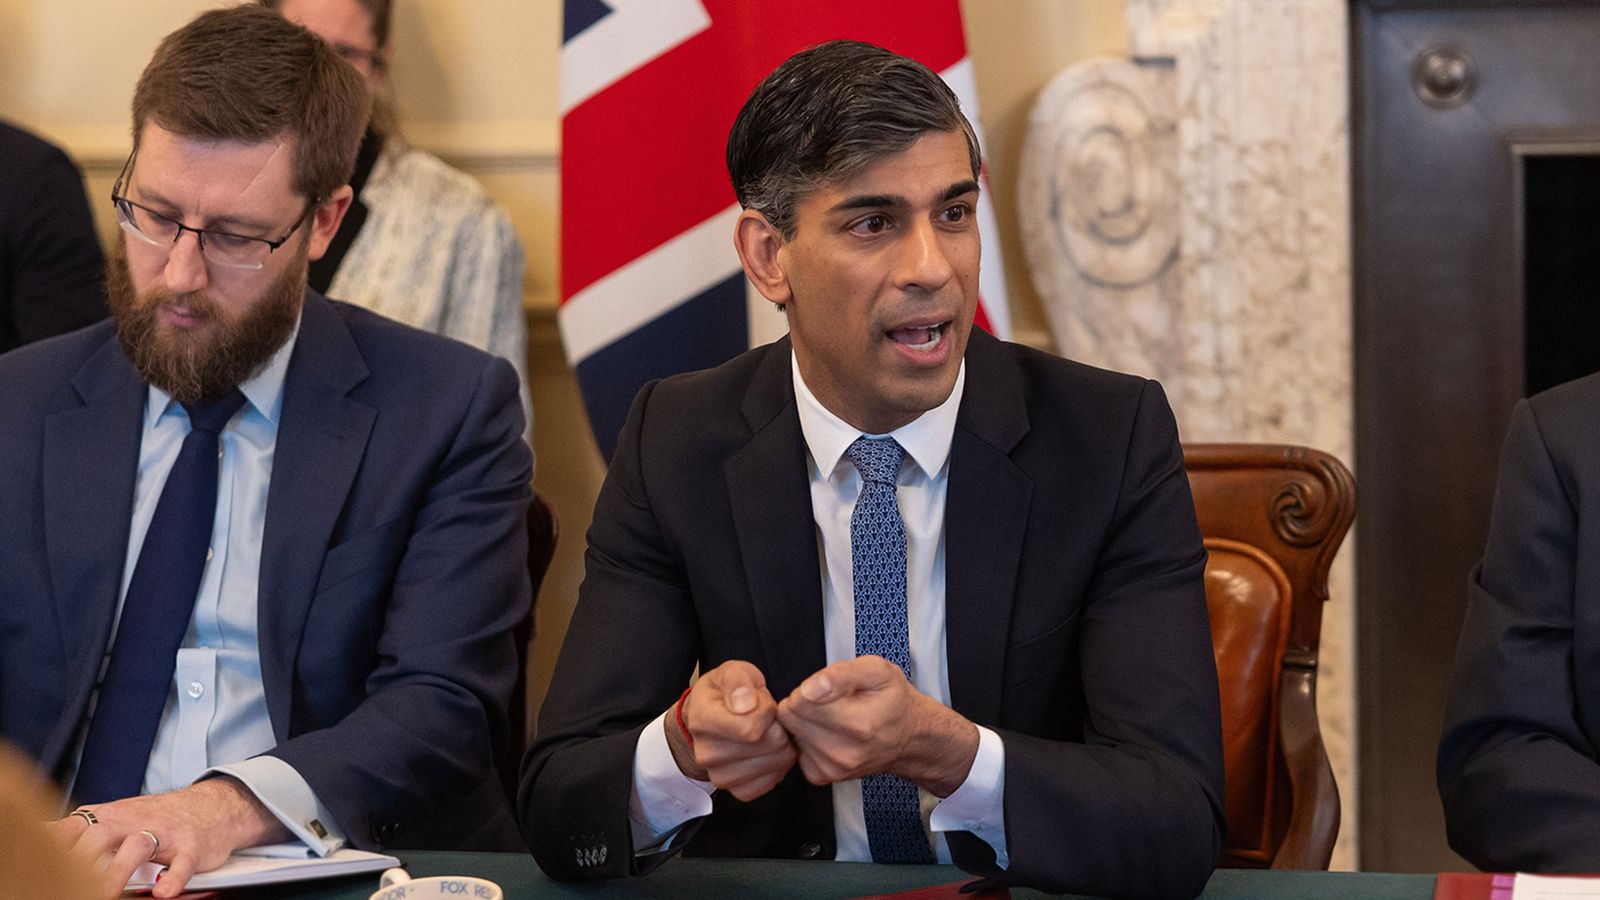 Rishi Sunak admits Tories may not win general election and claims UK heading for hung parliament